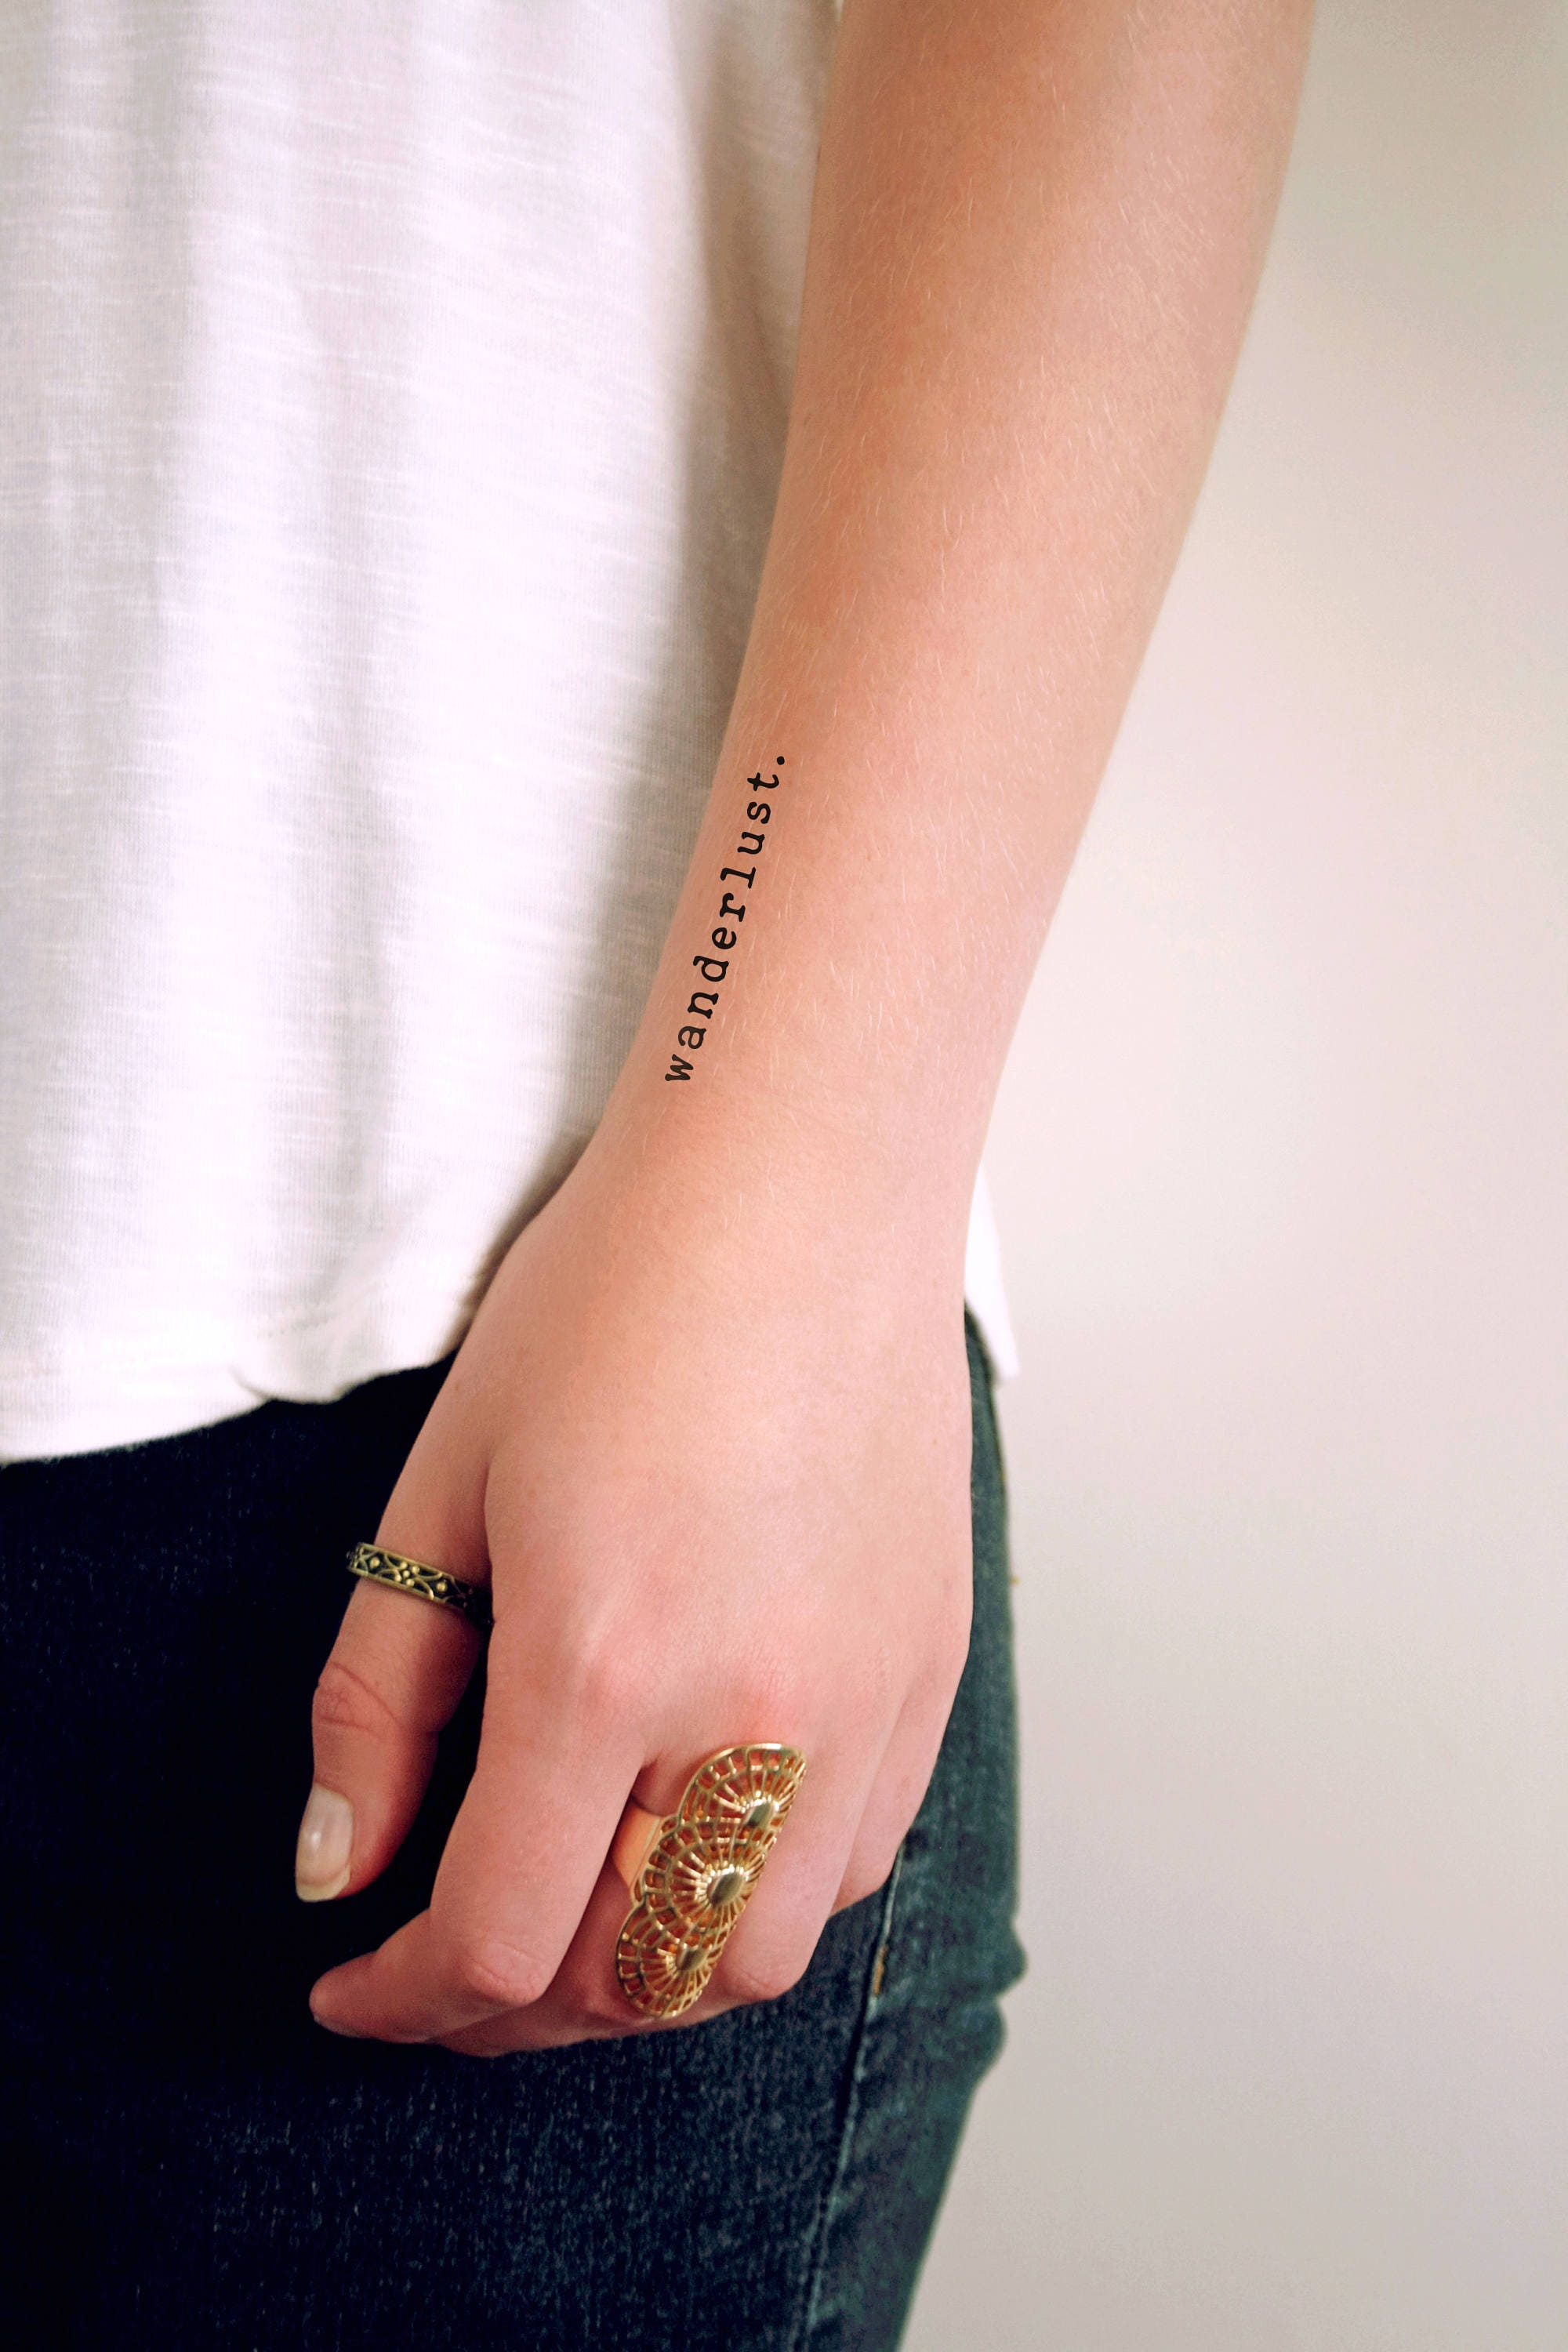 Buy 2 Wanderlust Temporary Tattoos  Quote Temporary Tattoo  Word Online  in India  Etsy